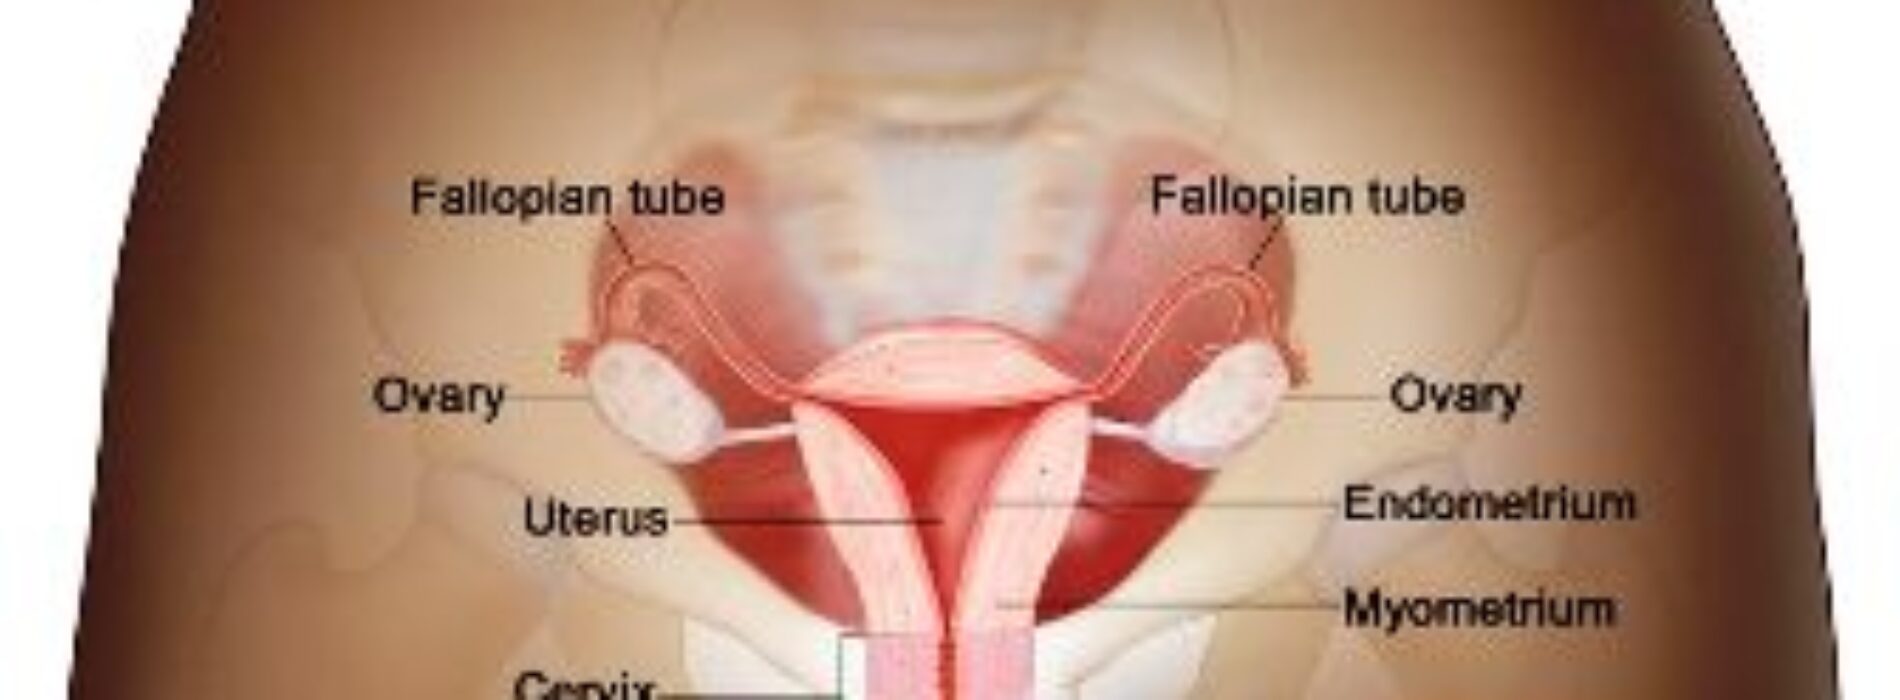 Facts you should know about cervical cancer